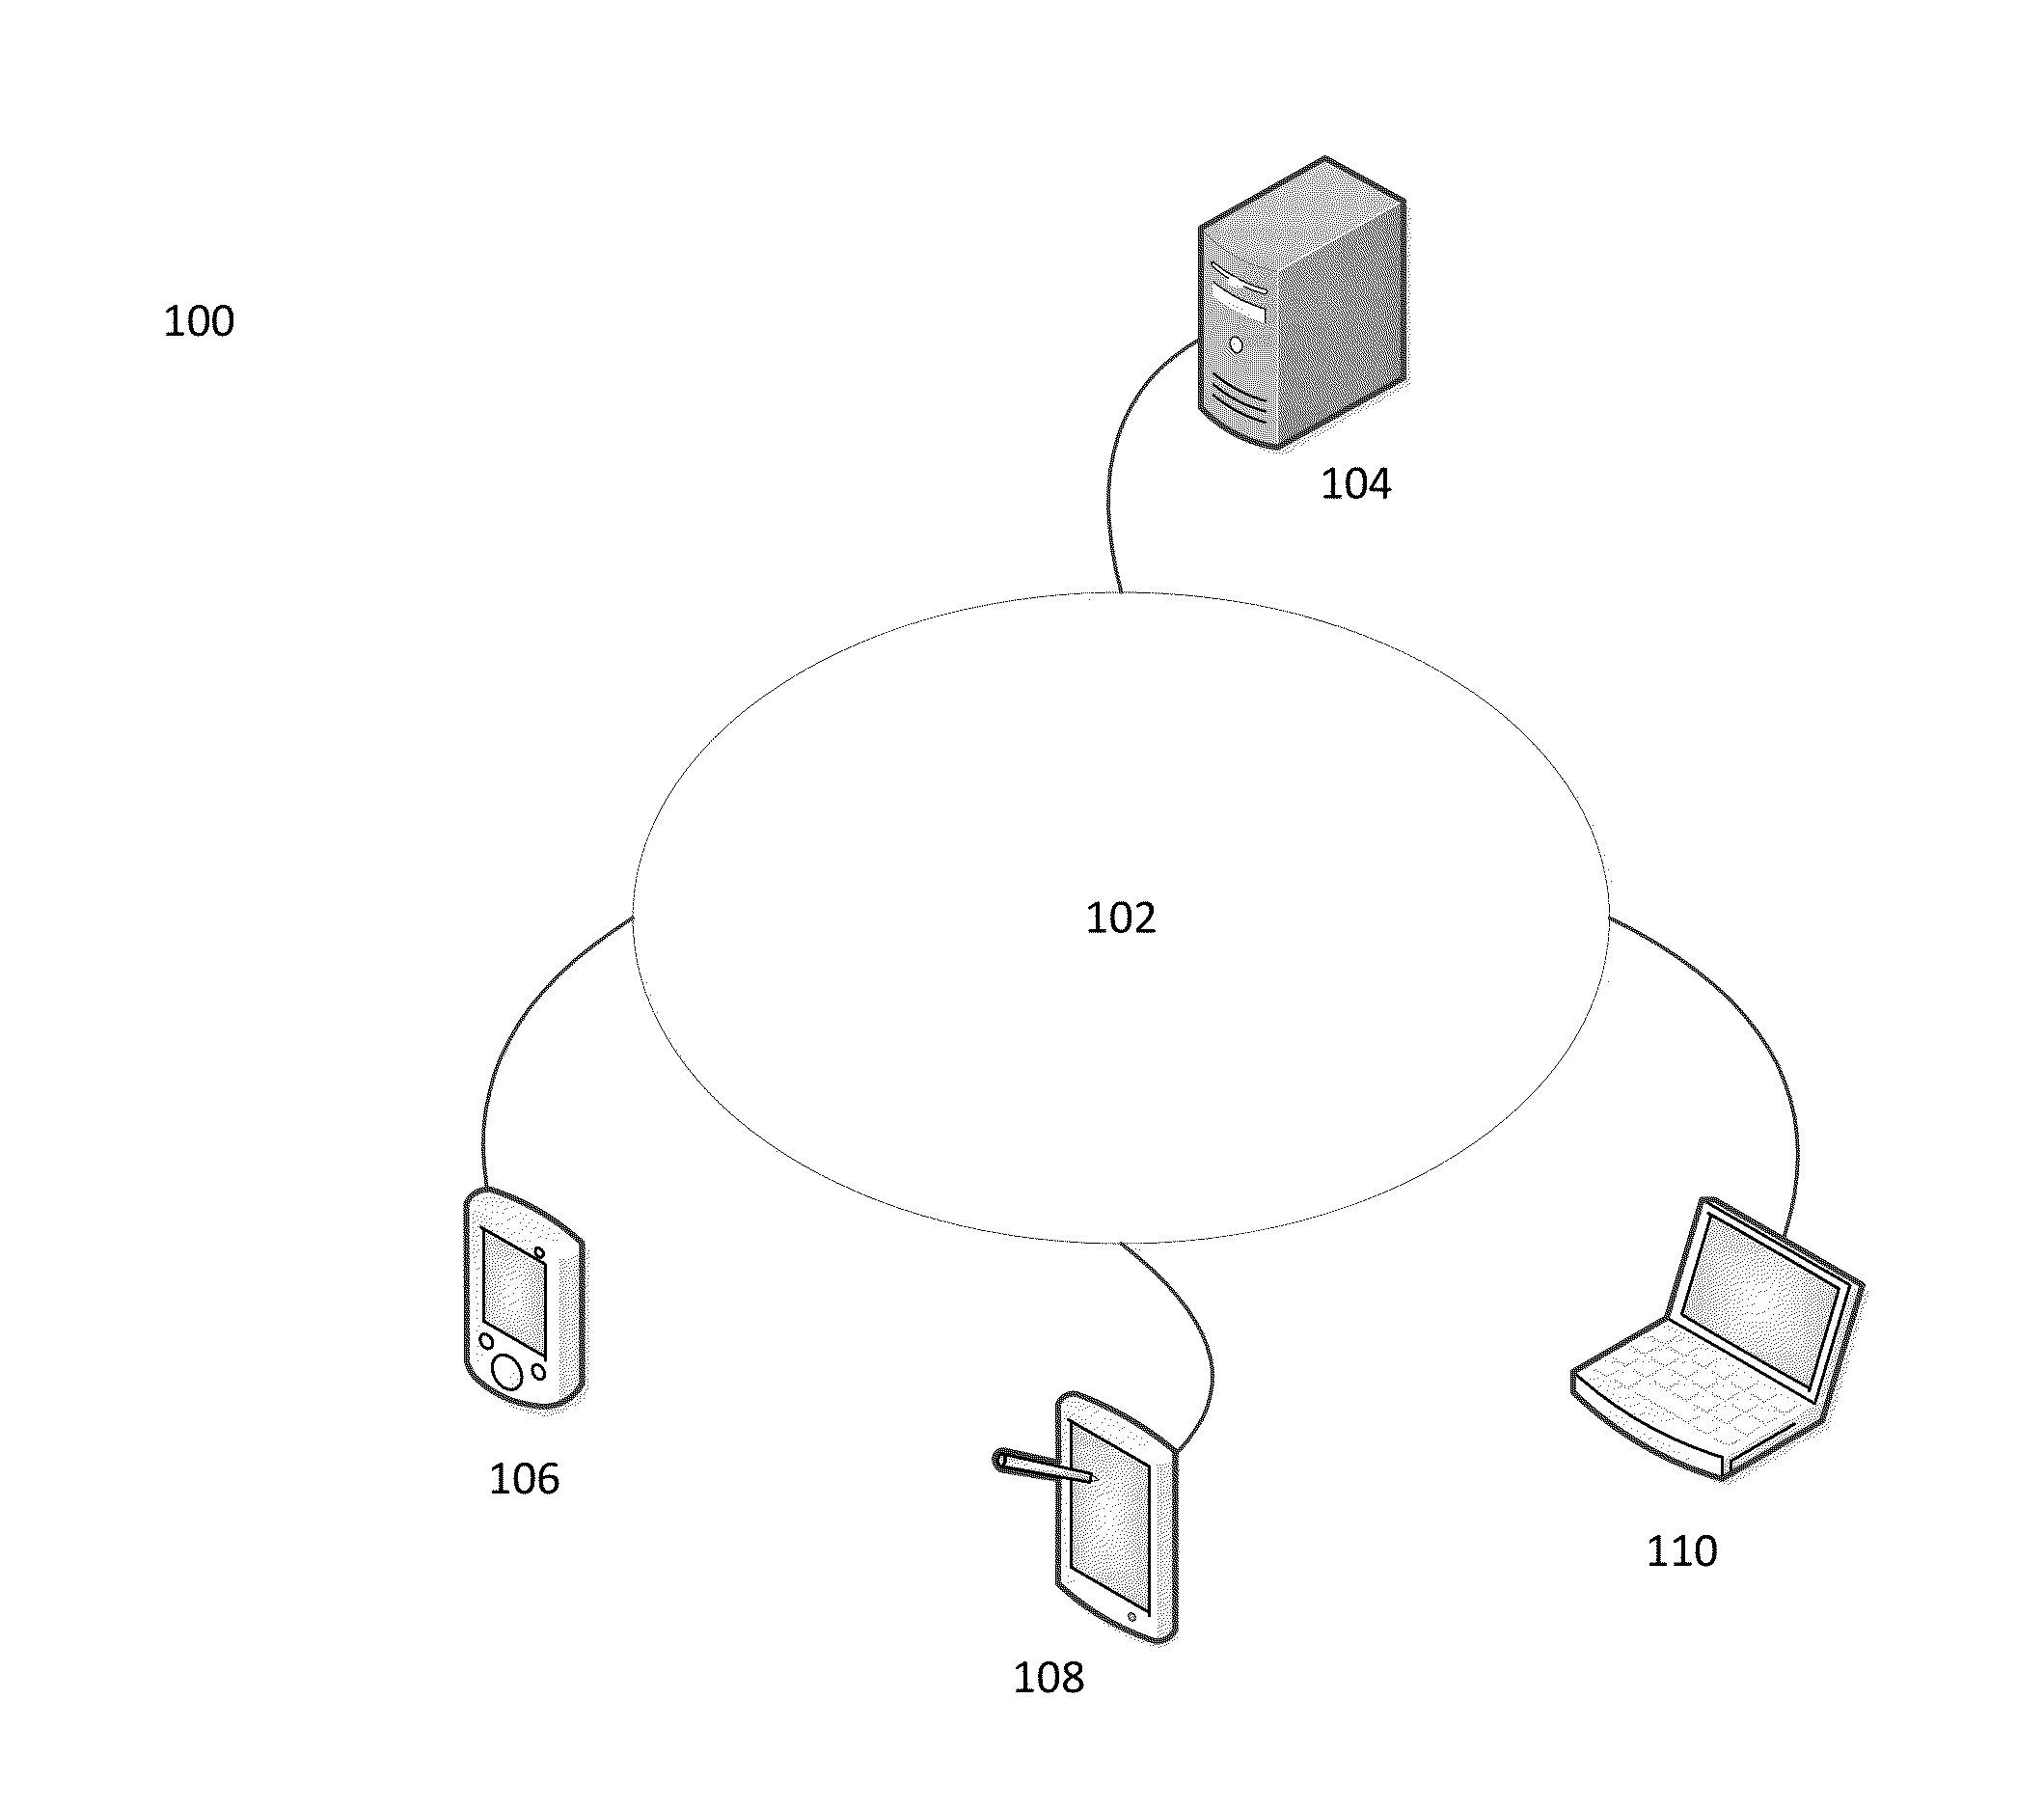 Systems, devices, and methods for determining value of an entity based on stock price and financial data